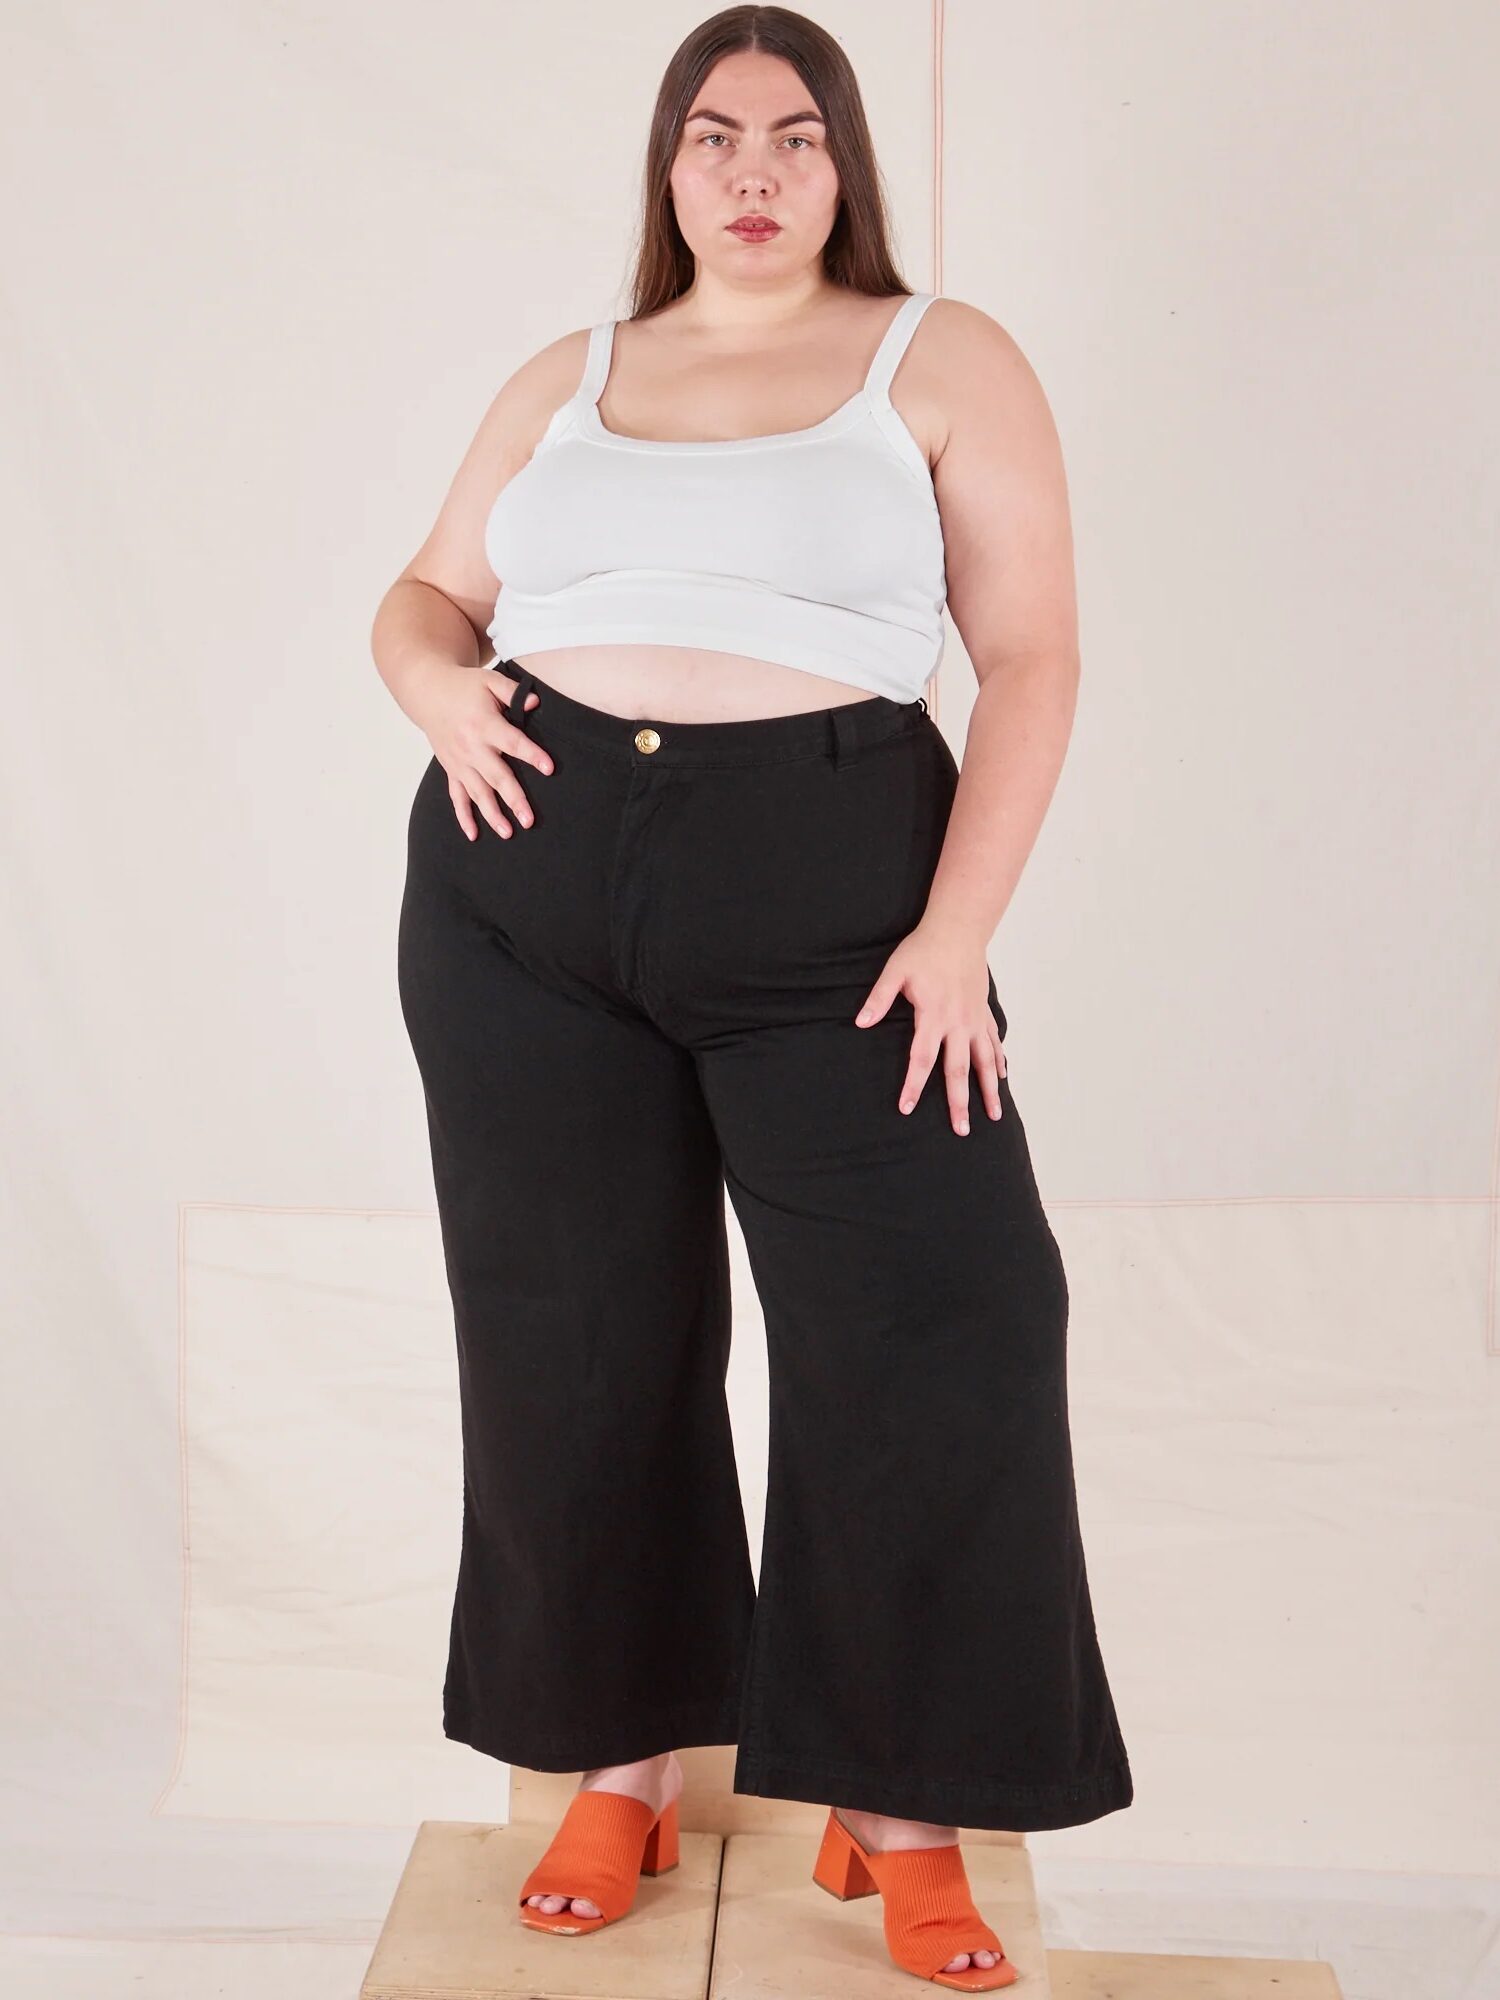 A woman in a white crop top and black palazzo pants stands confidently, with one hand on her hip.